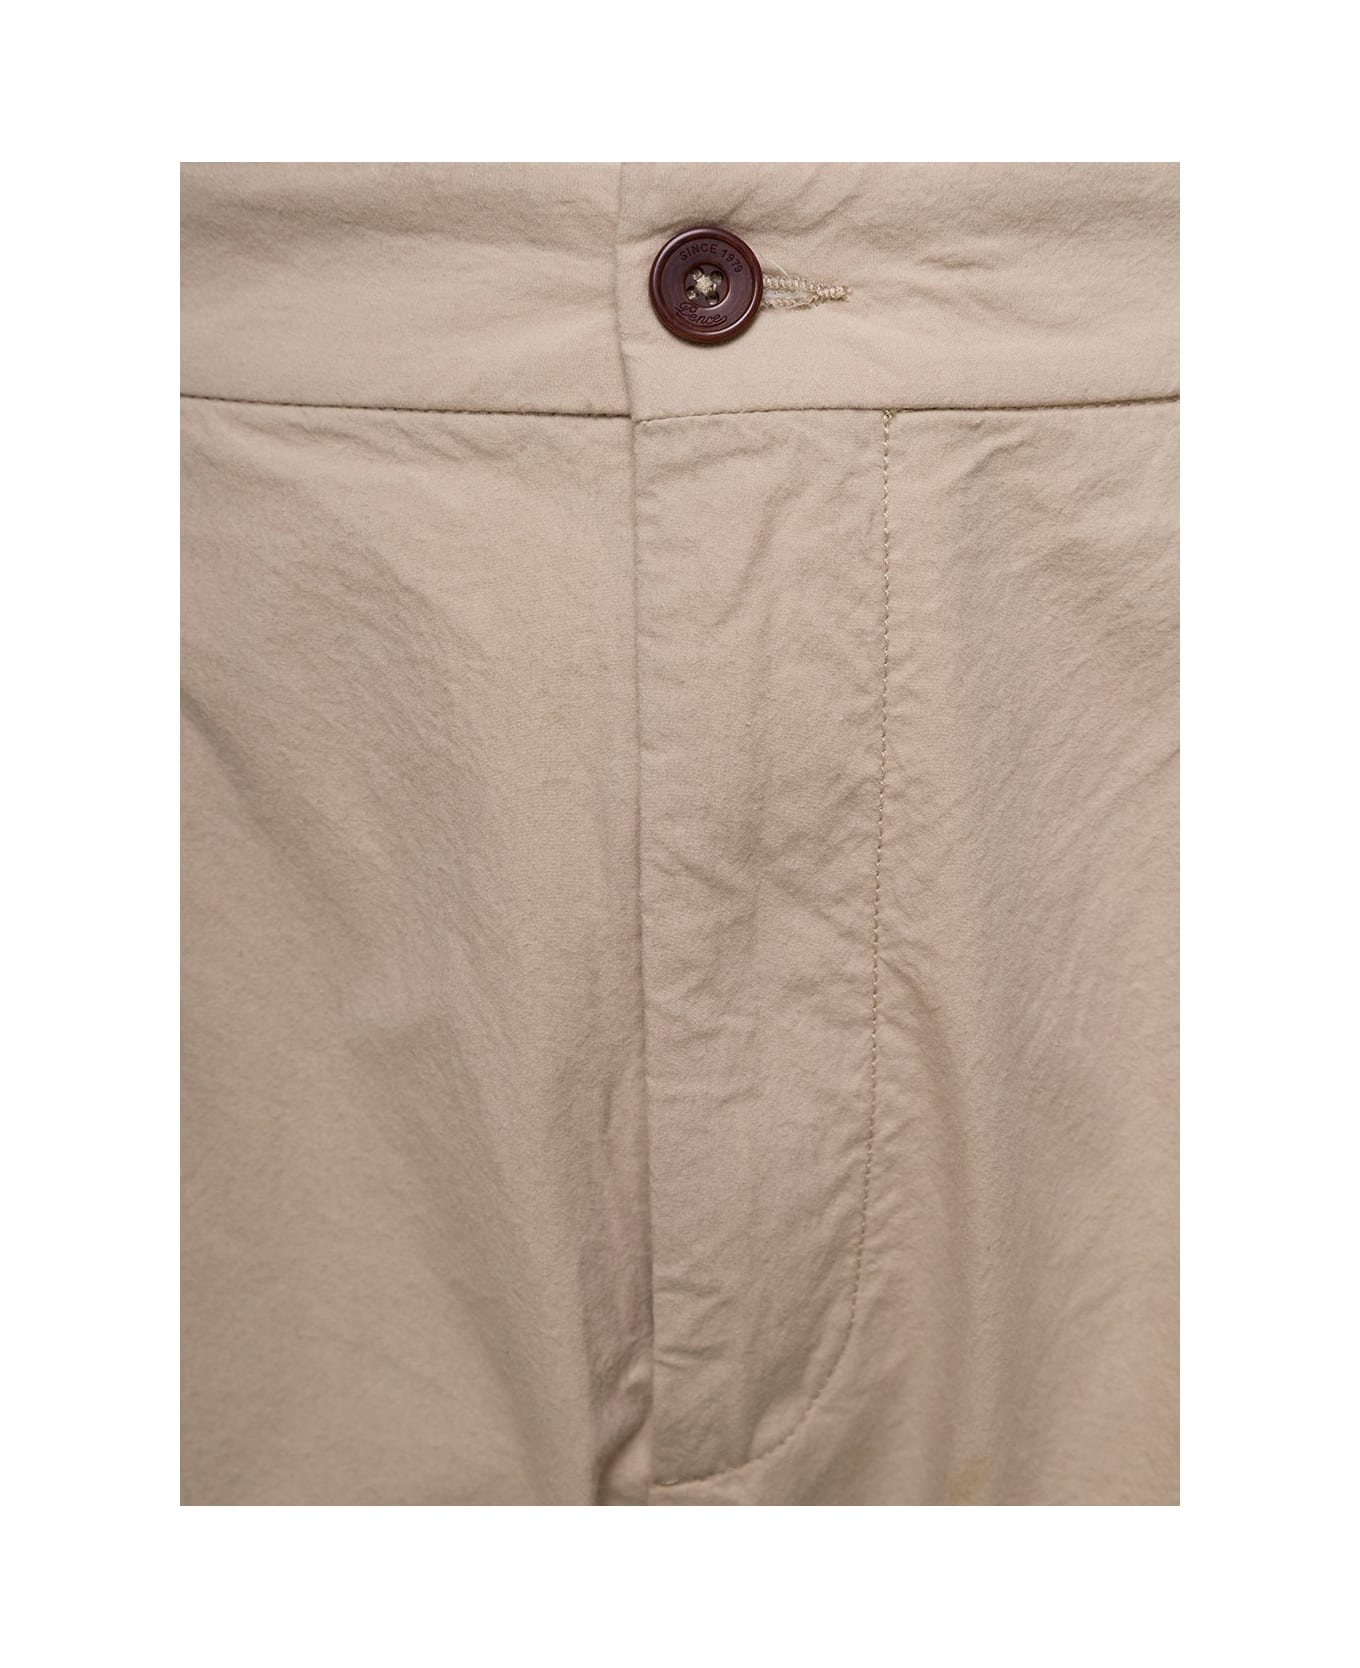 Pence Beige Pants With Button Fastening In Cotton Man - Beige ボトムス